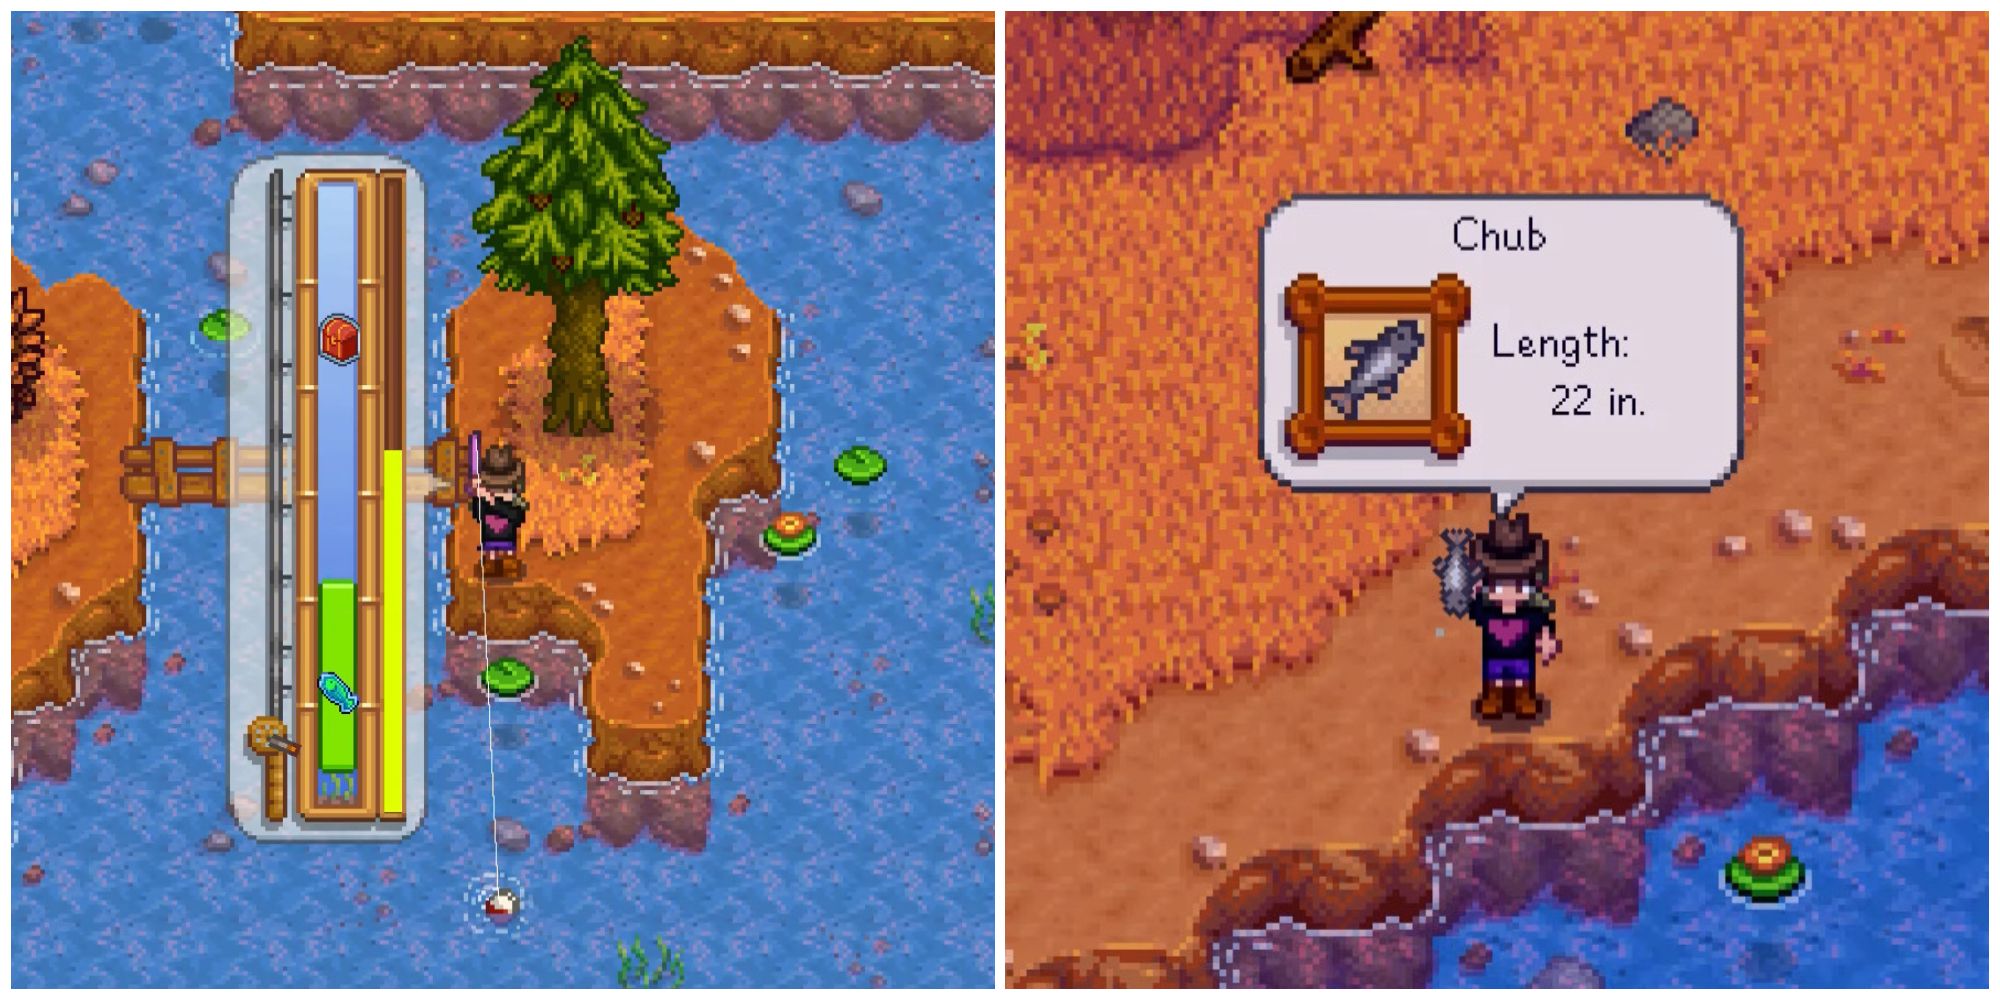 Split image of a character fishing and a character after catching a Chub in Stardew Valley